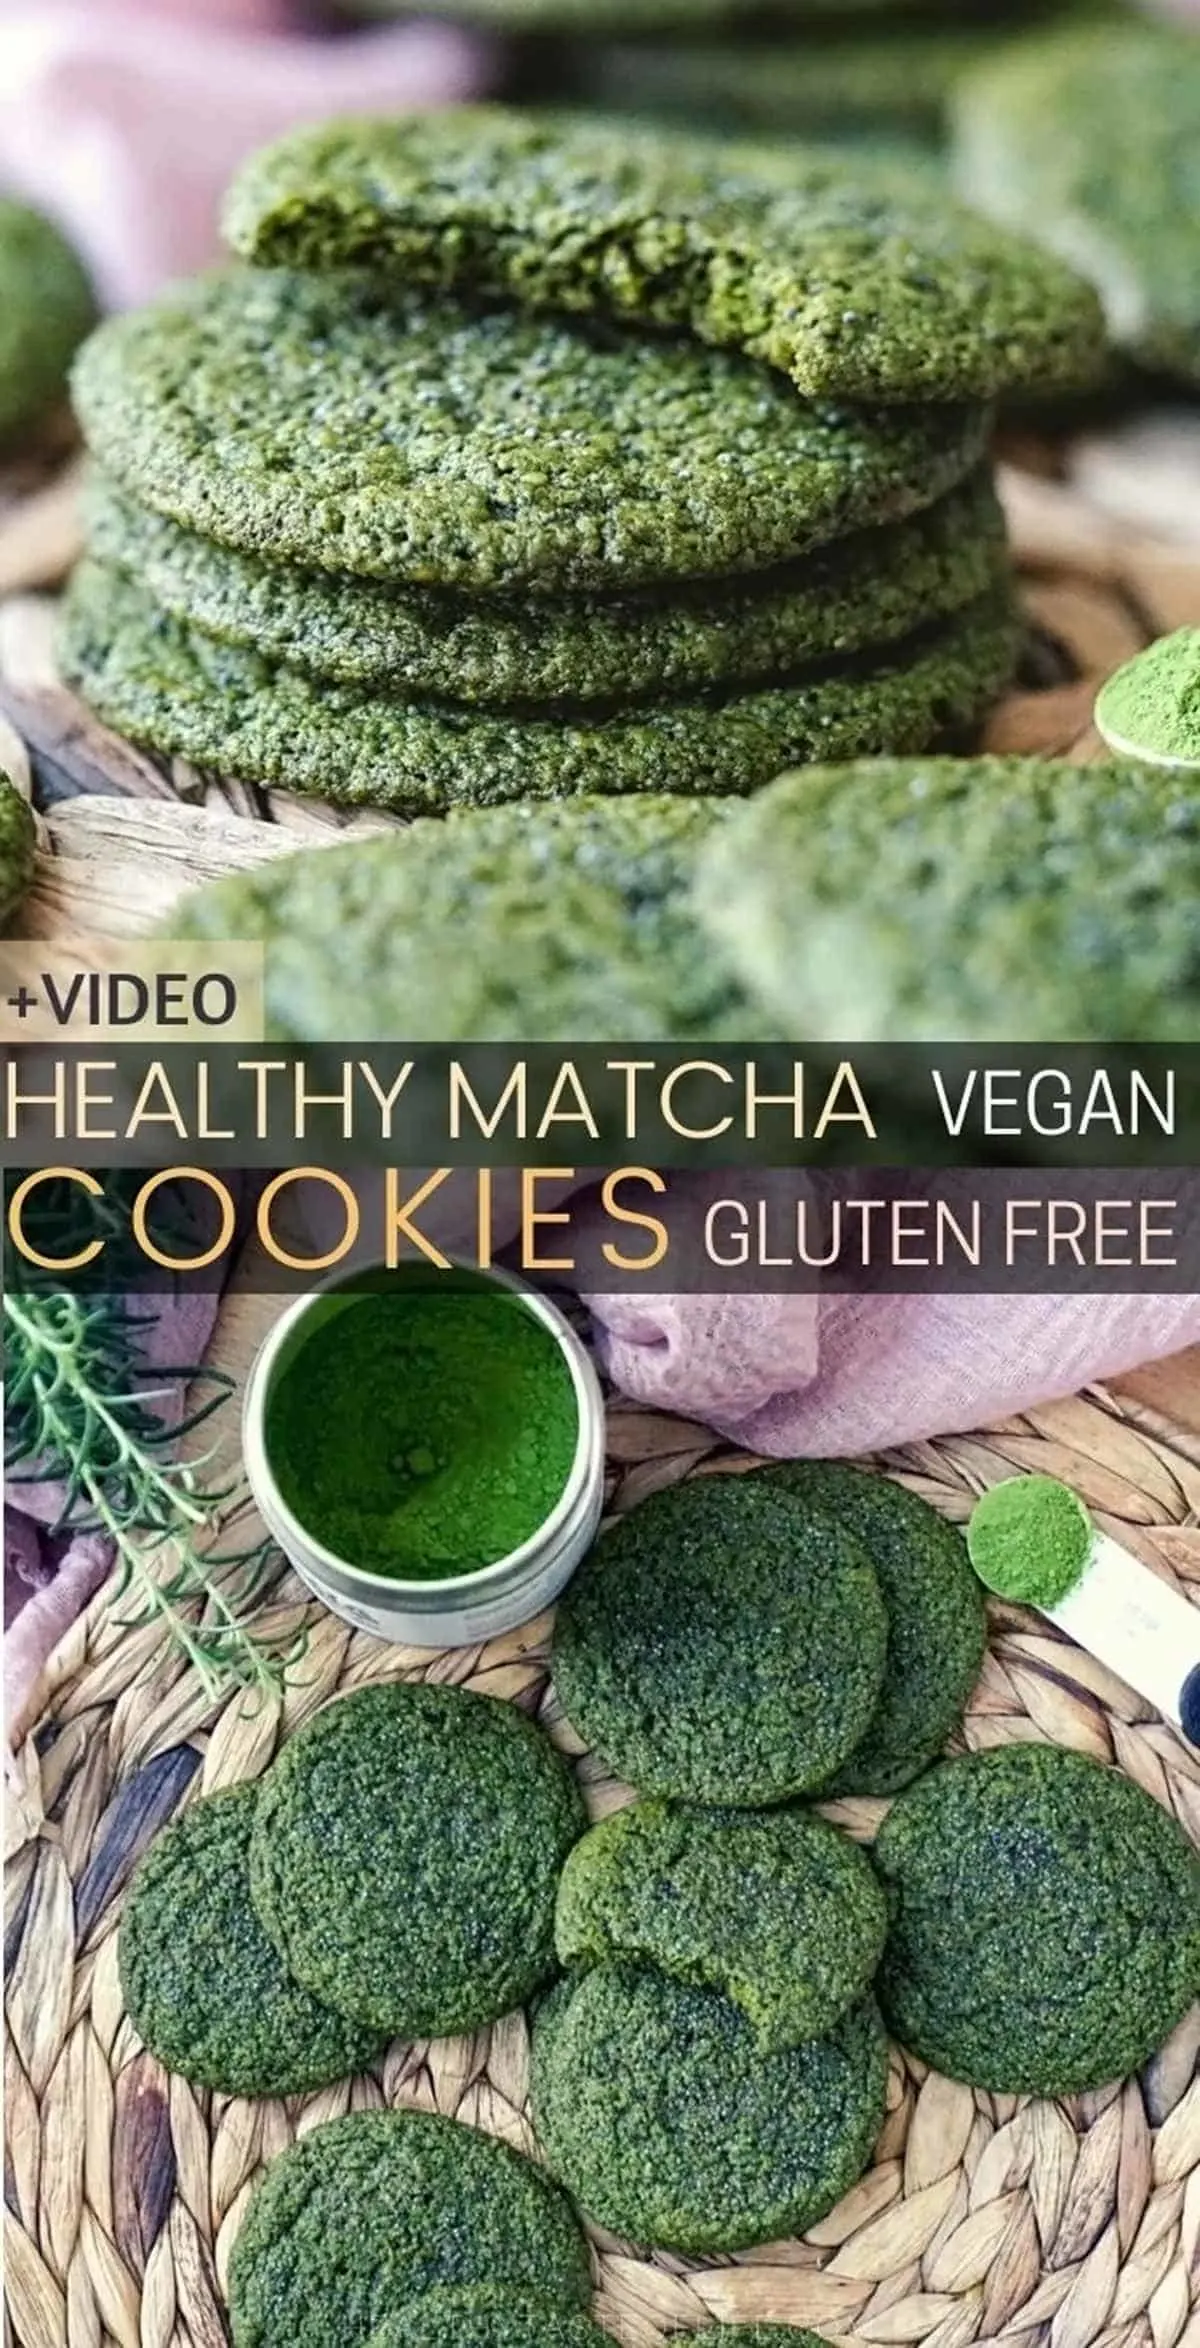 Healthy Matcha Cookies Recipe - Vegan Gluten Free Matcha cookies with oatmeal and seeds. 